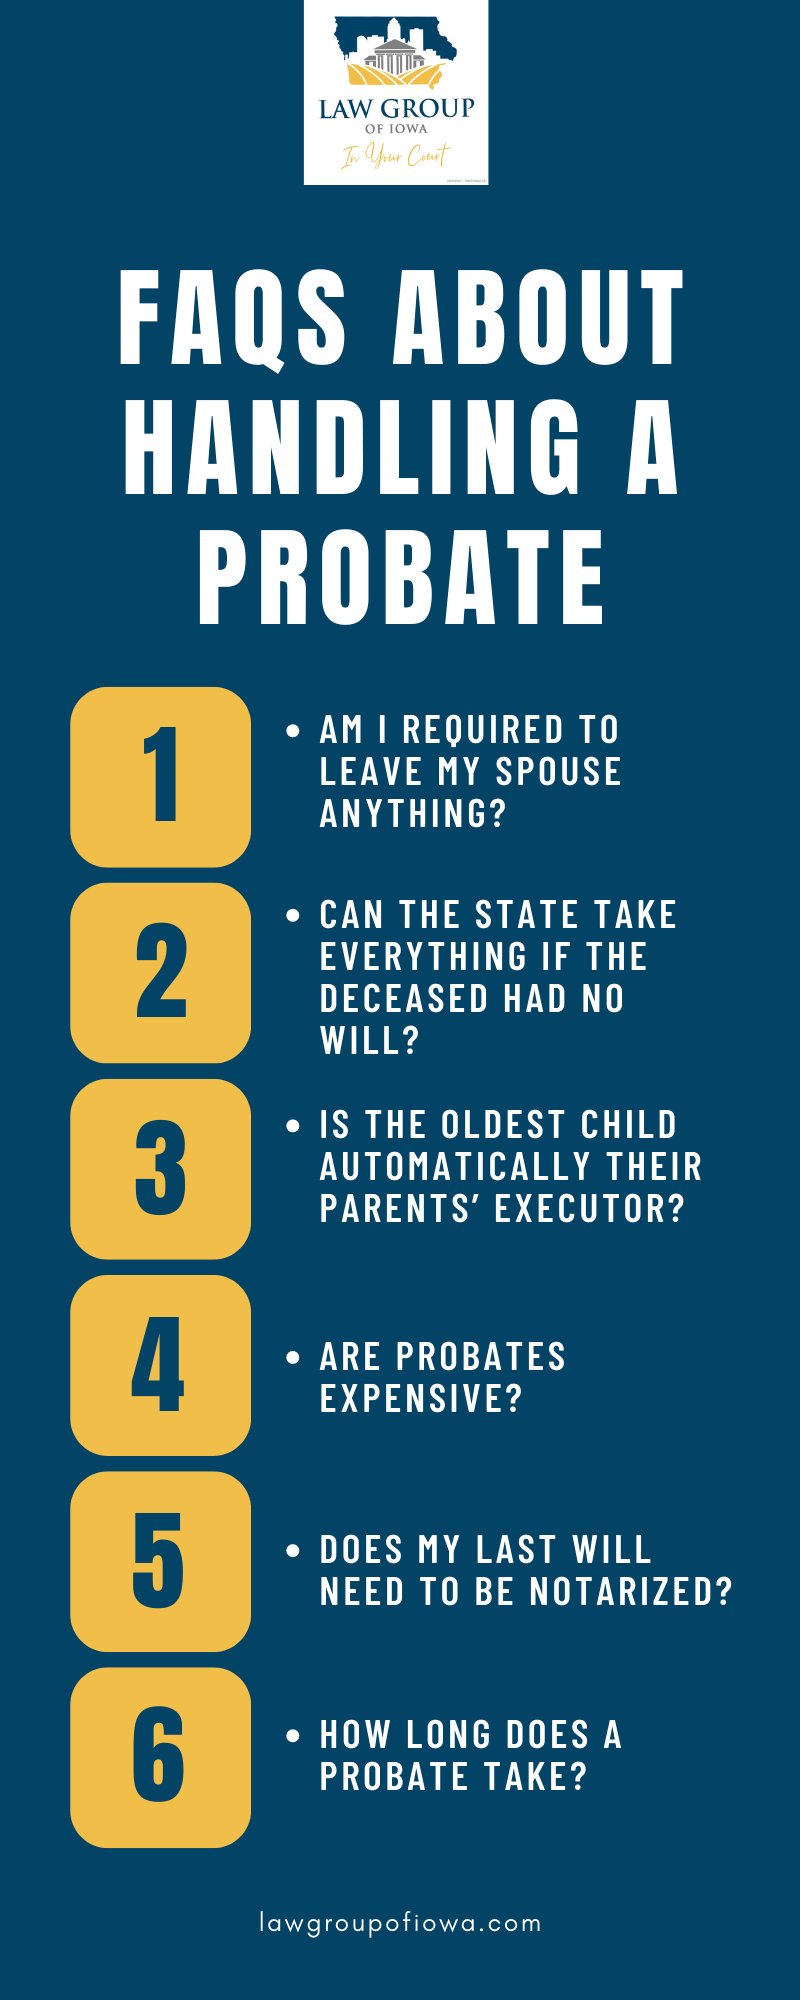 FAQs About Handling a Probate Infographic